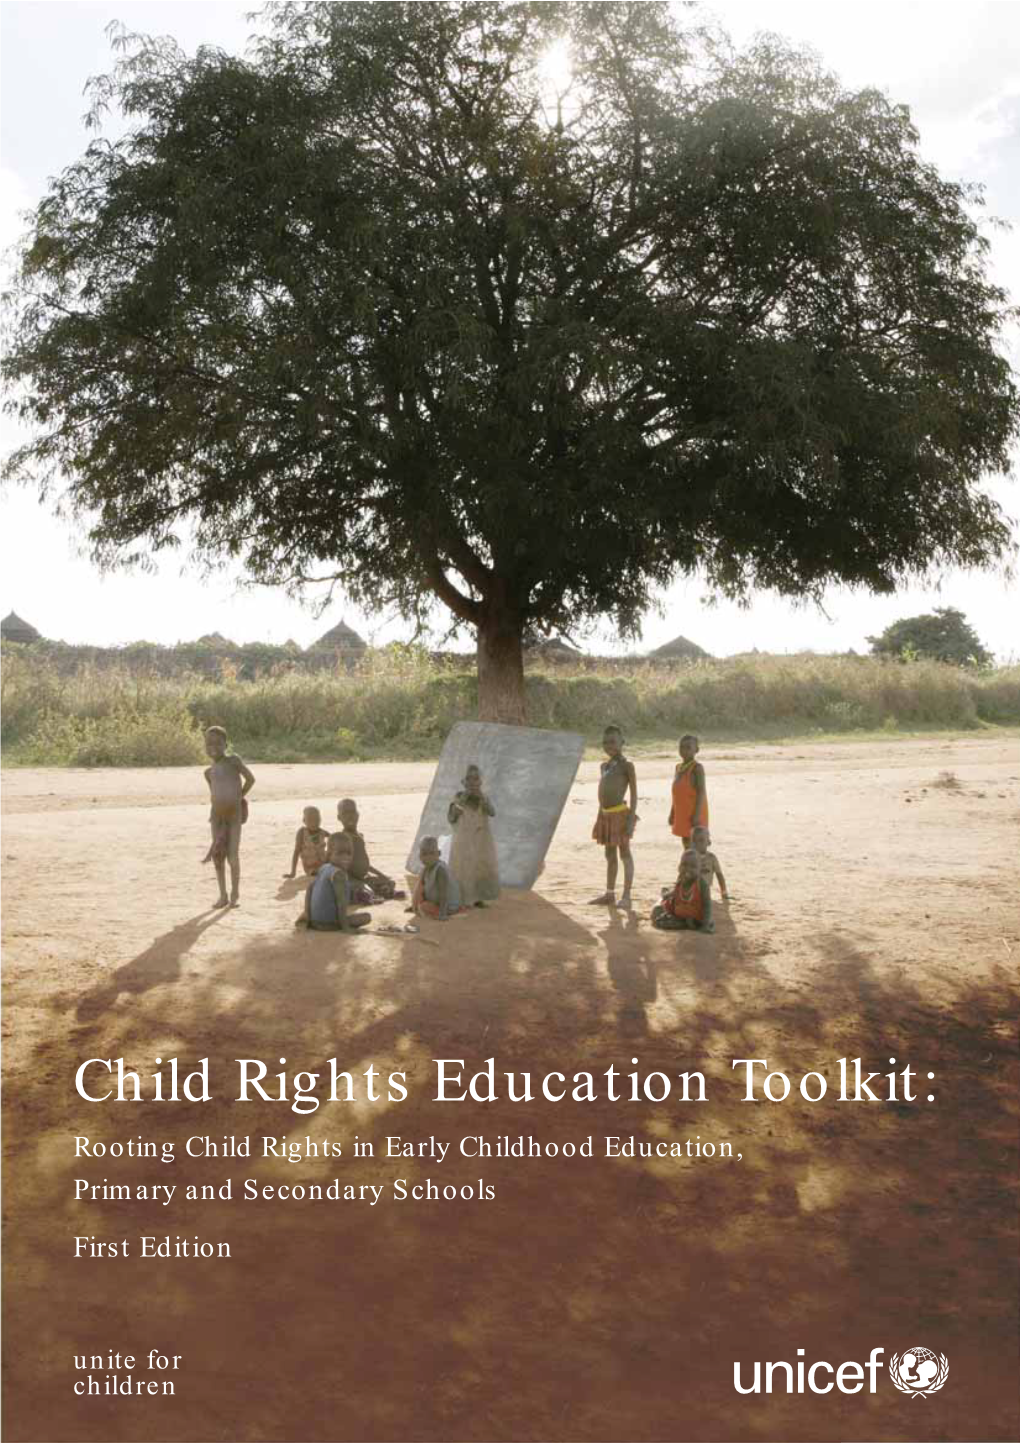 Child Rights Education Toolkit: Rooting Child Rights in Early Childhood Education, Primary and Secondary Schools First Edition